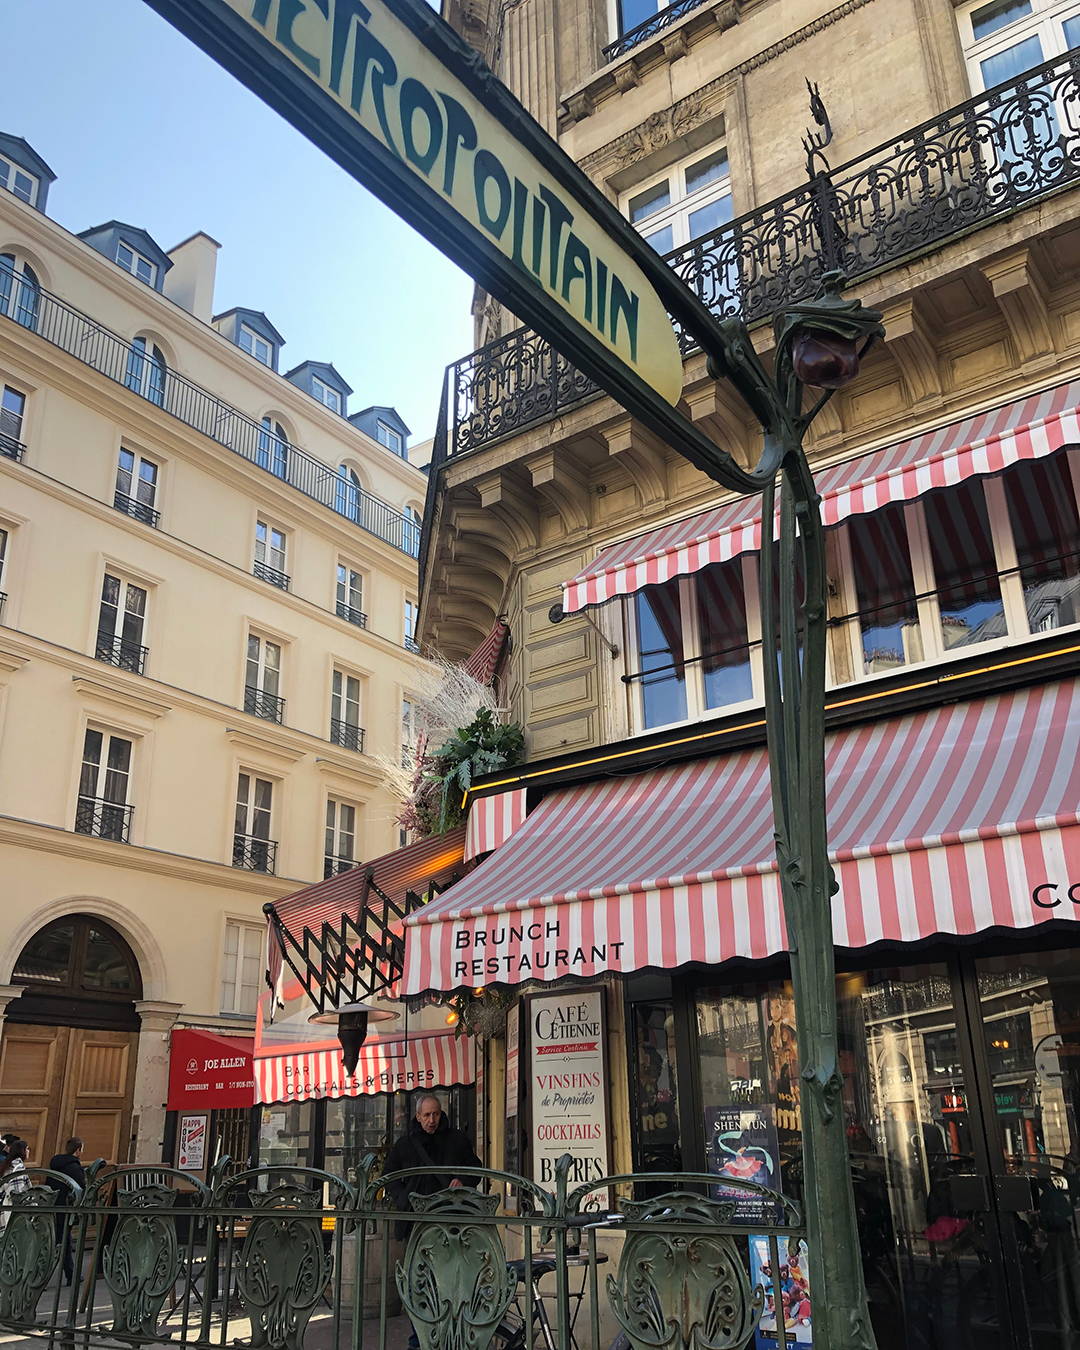 The Metropolitain sign in Paris with a cafe in the background.